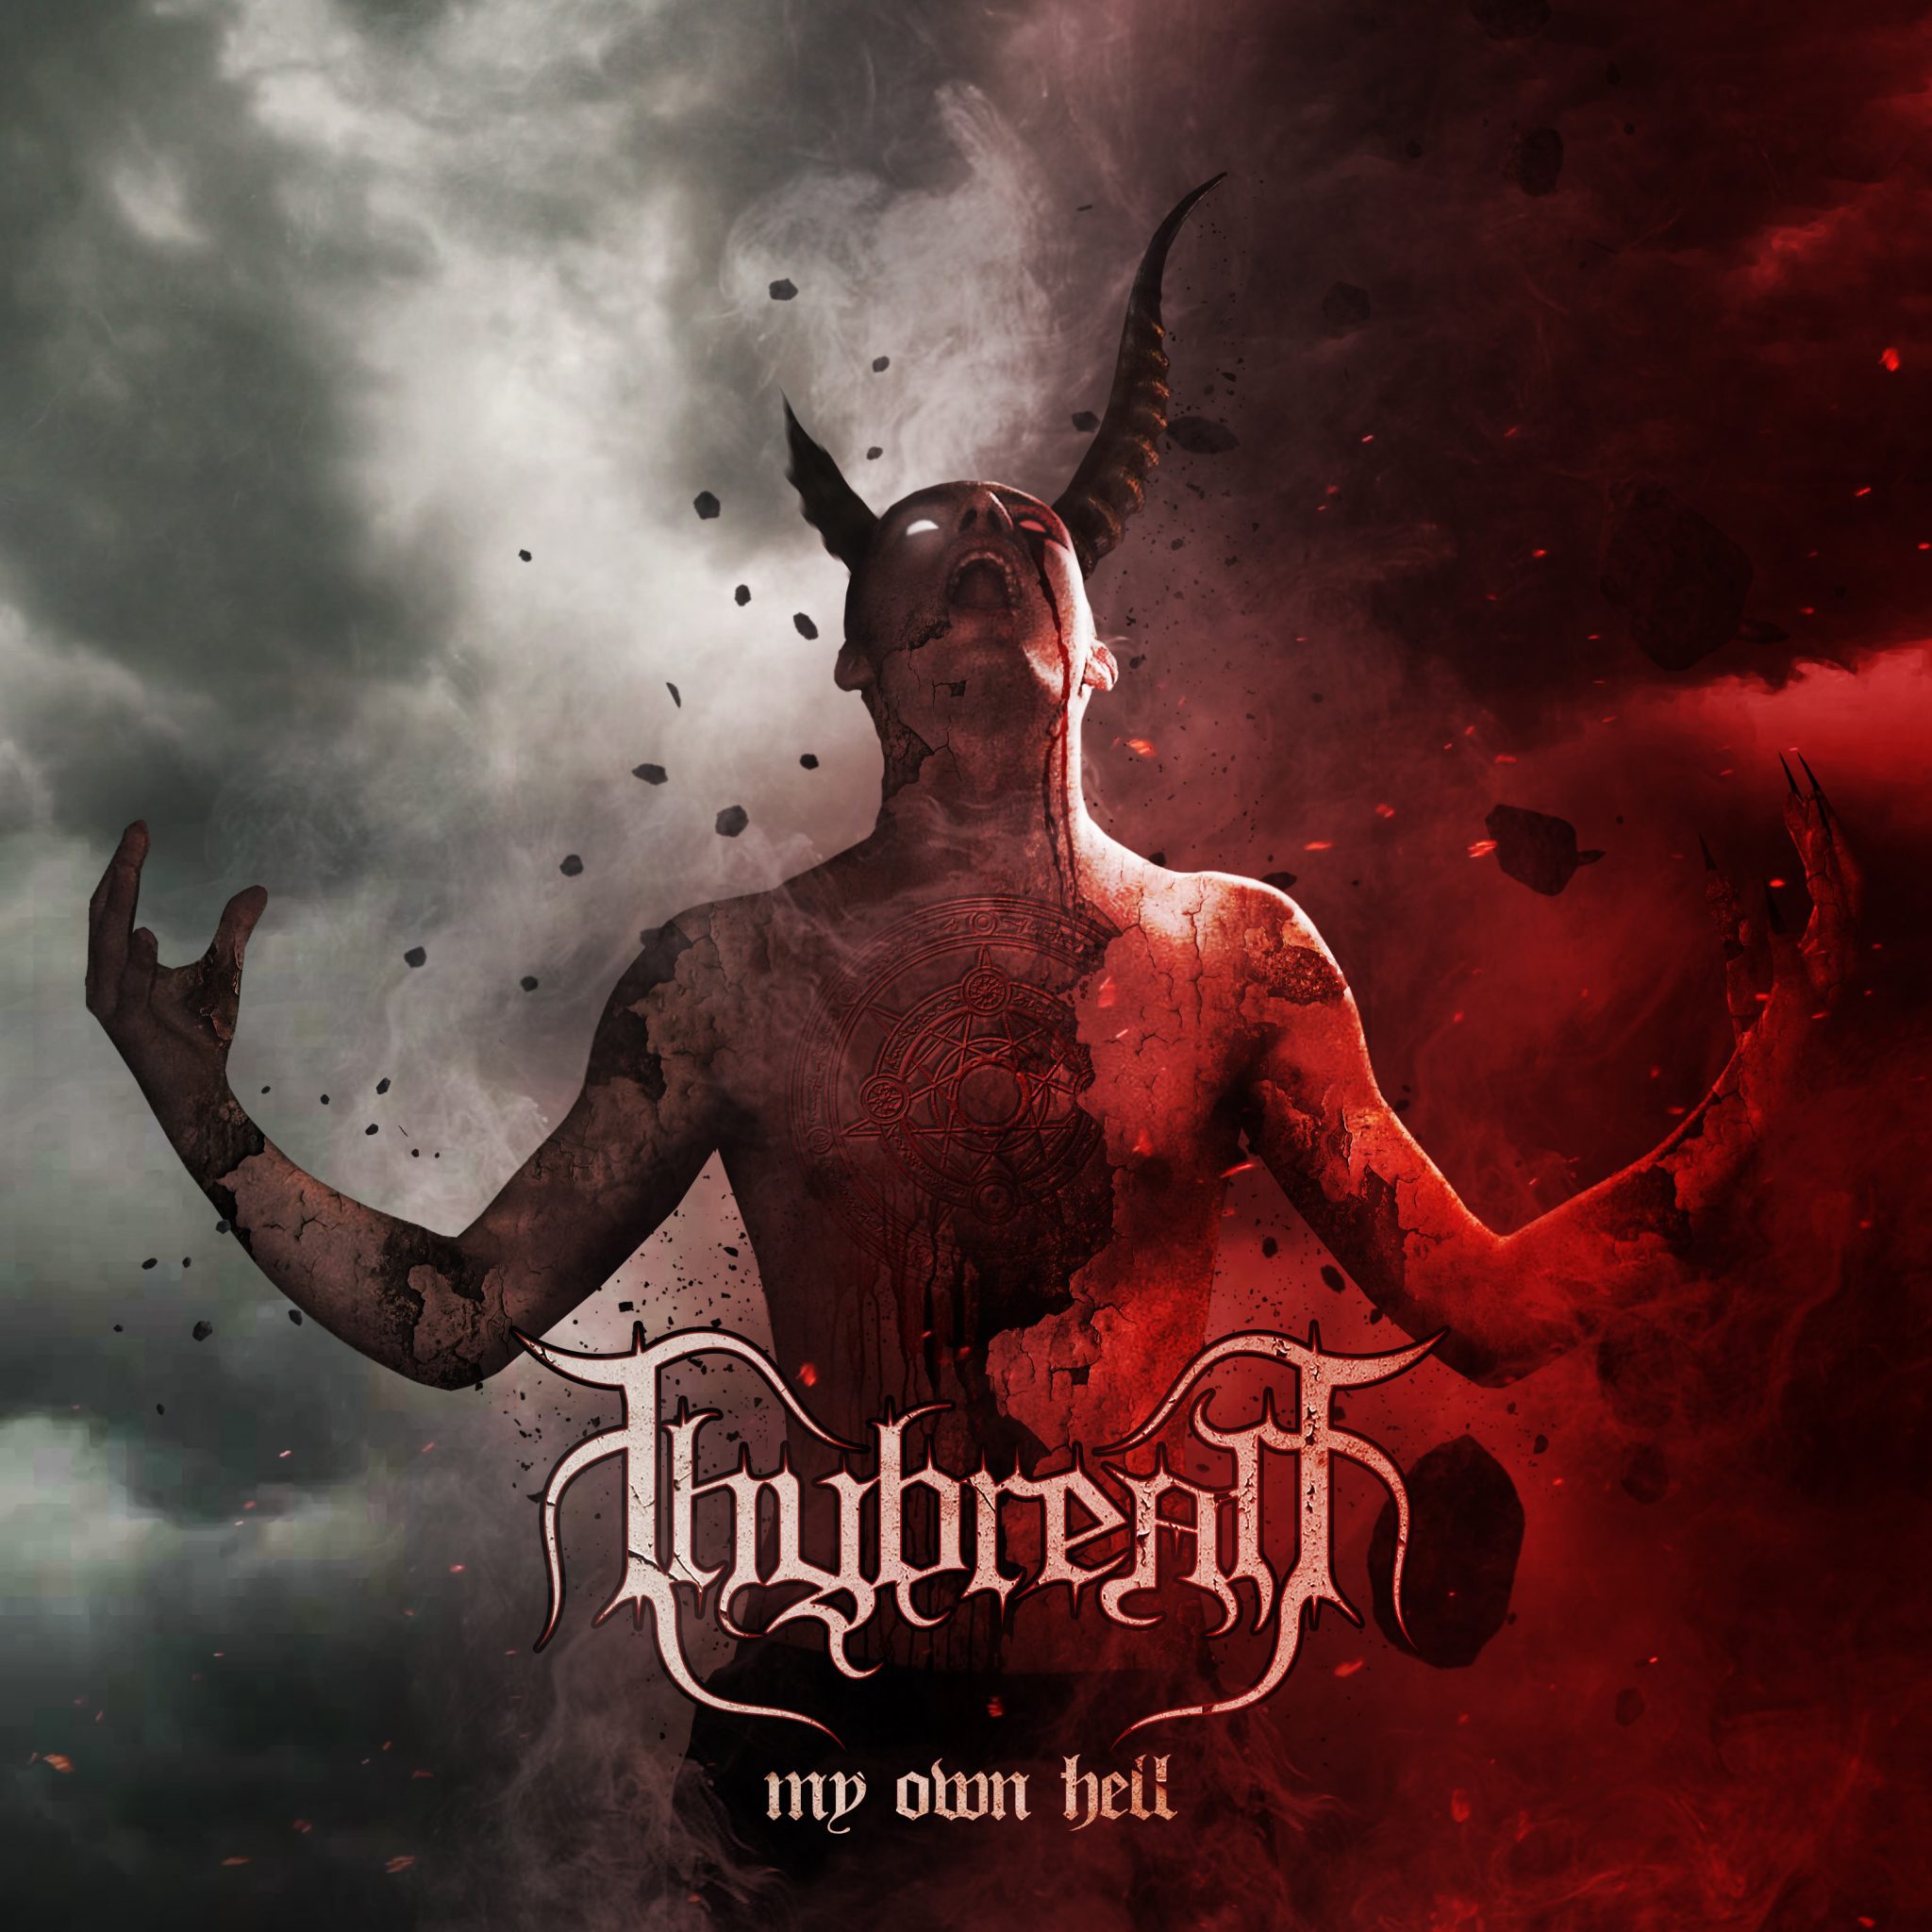 Thybreath – (Welcome to my Hell) All my Hate